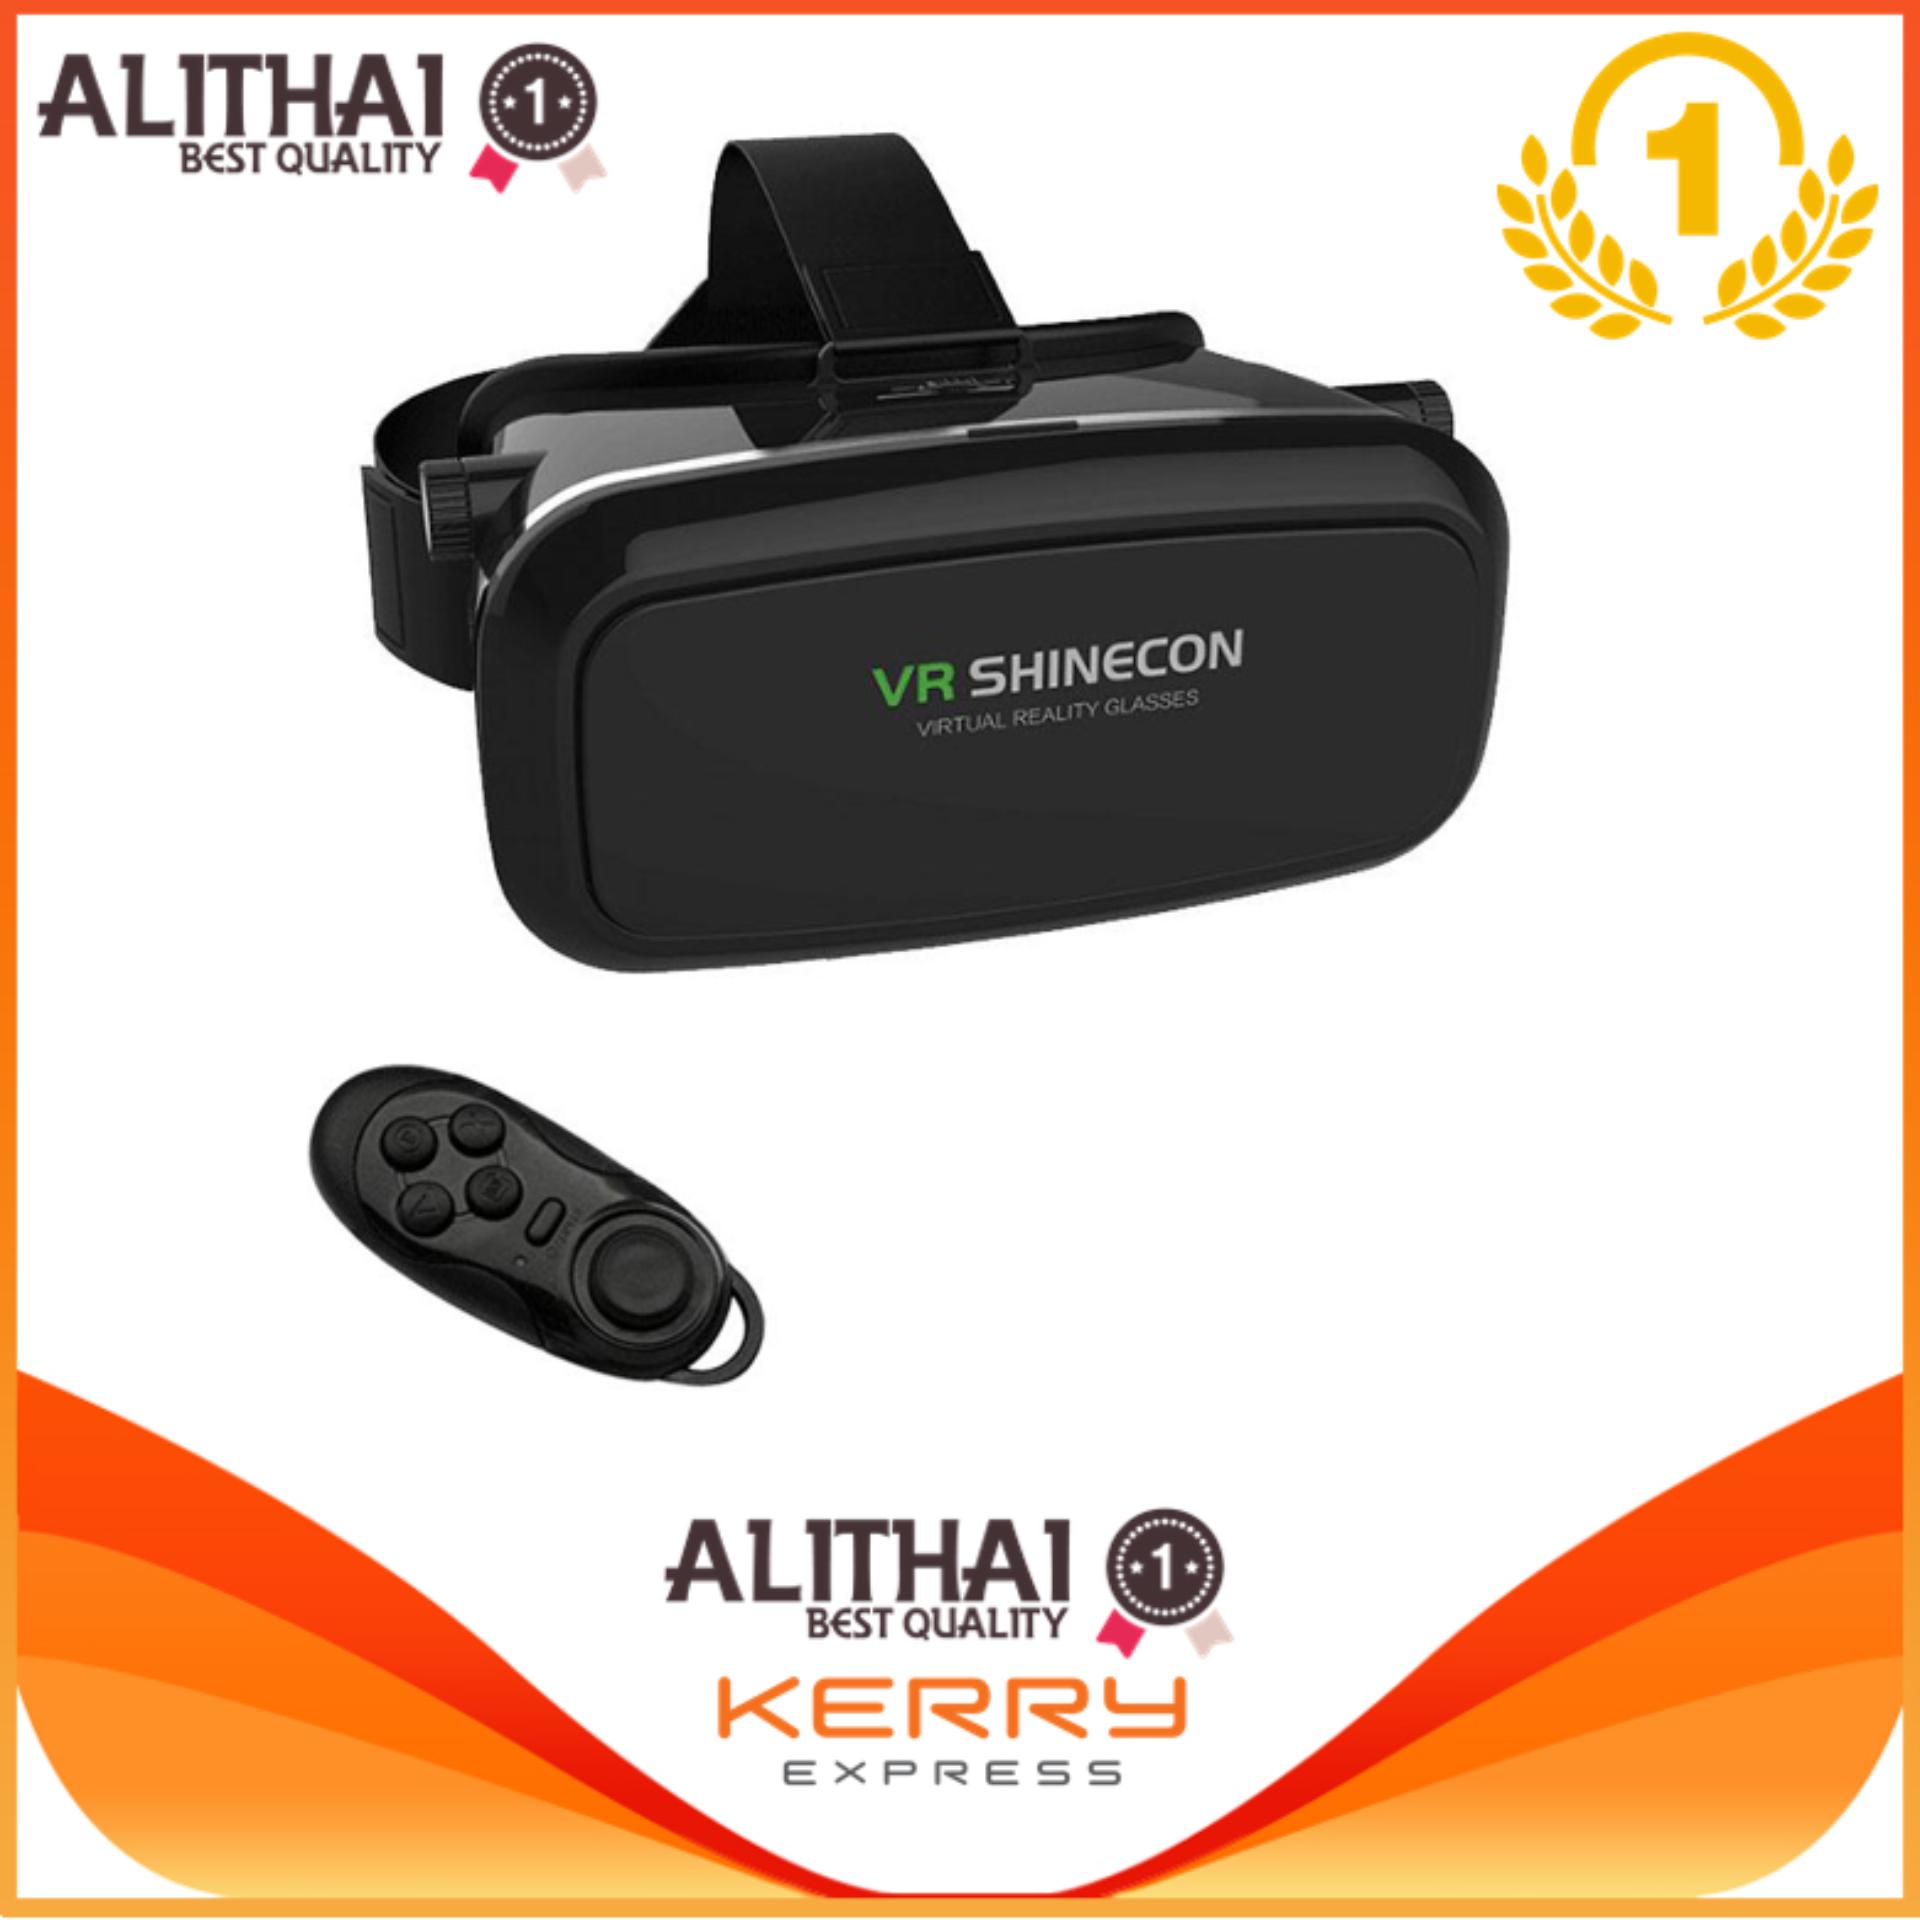 VR SHINECON Virtual Reality Headset 3D Glasses - BLACK Free 4 in 1 Bluetooth Wireless Selfie, Joystick, Mouse ,Remote